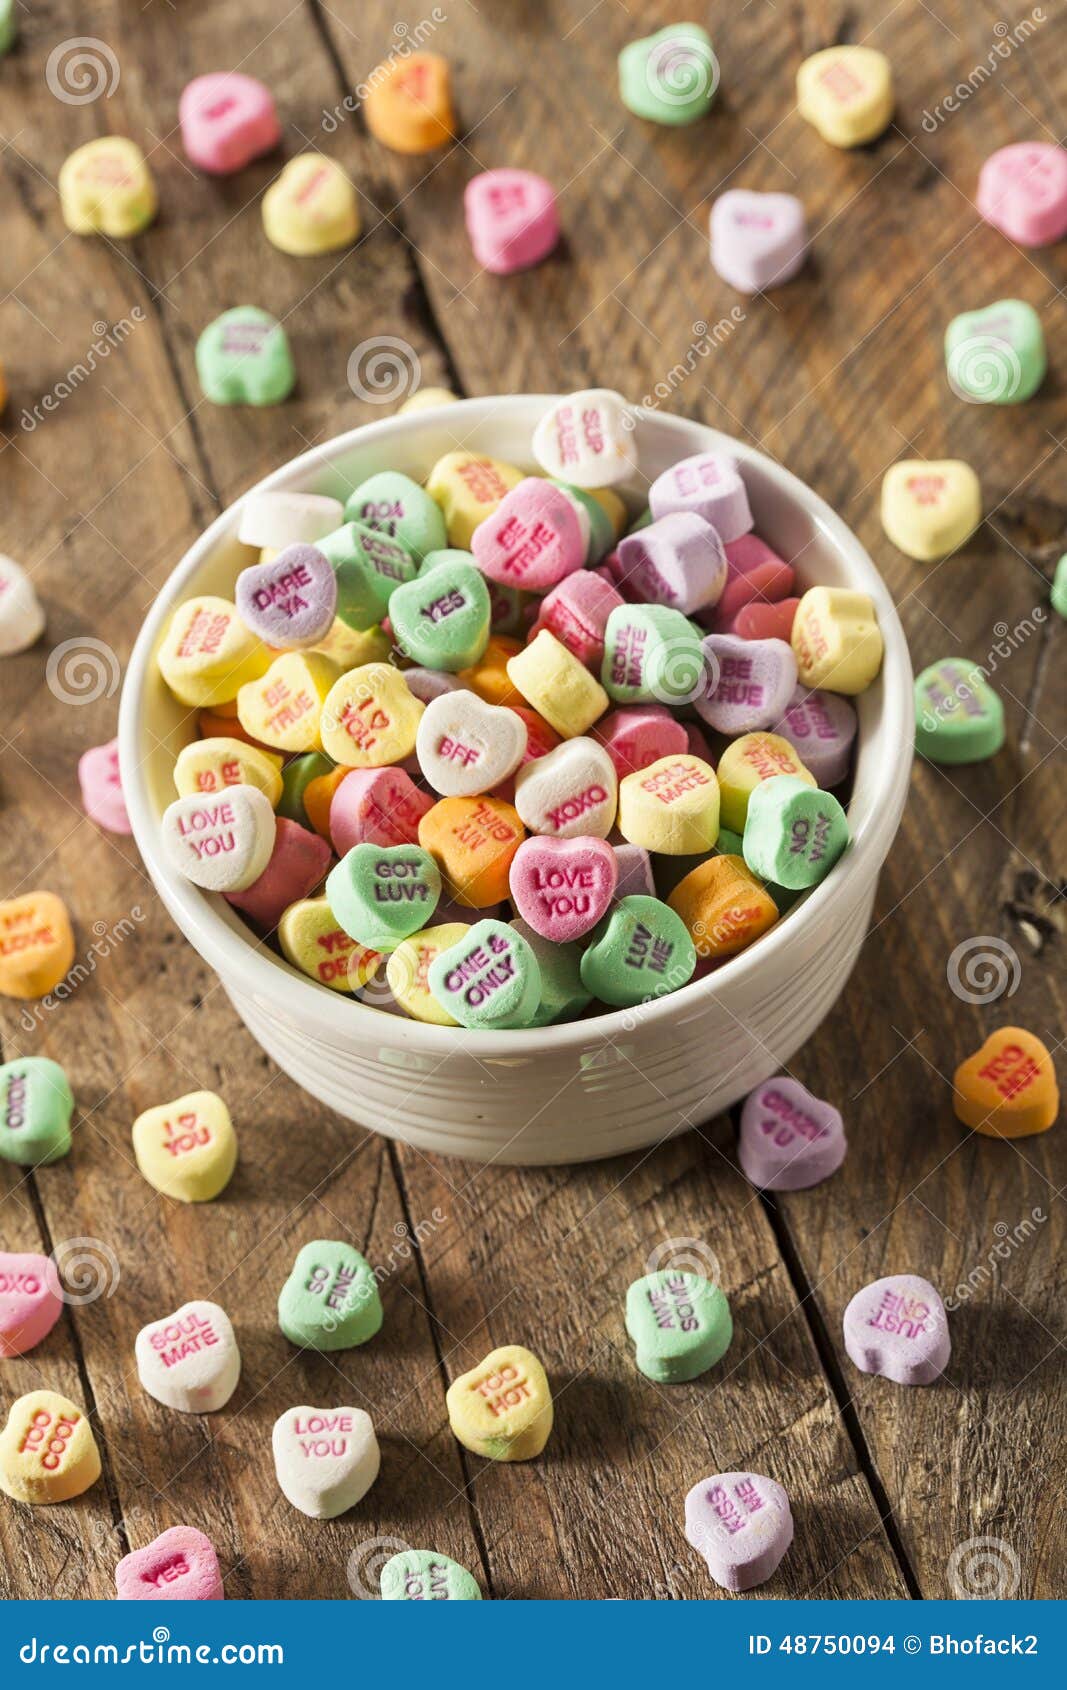 Colorful Candy Conversation Hearts Stock Photo - Image of hearts ...